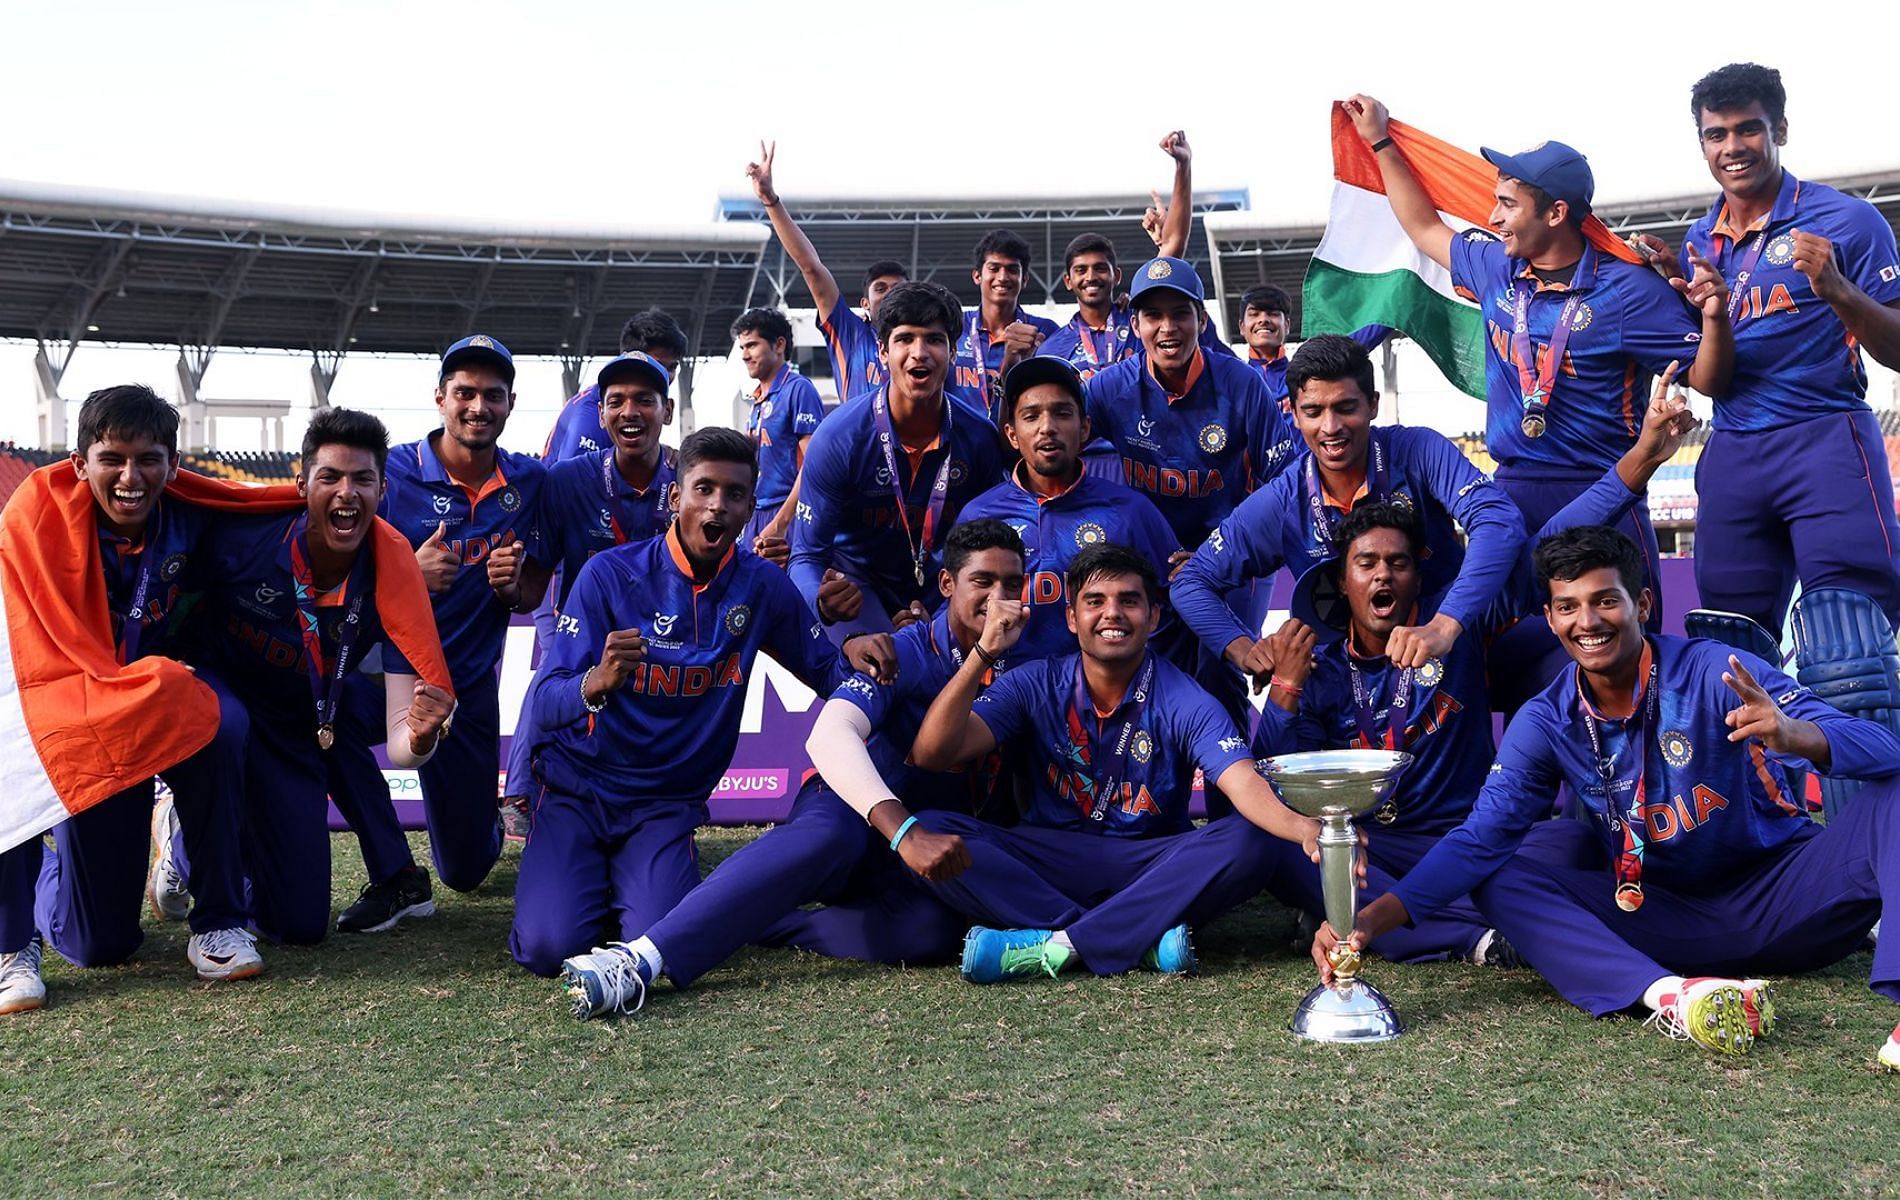 India won the U-19 World Cup title for a record 5th time.